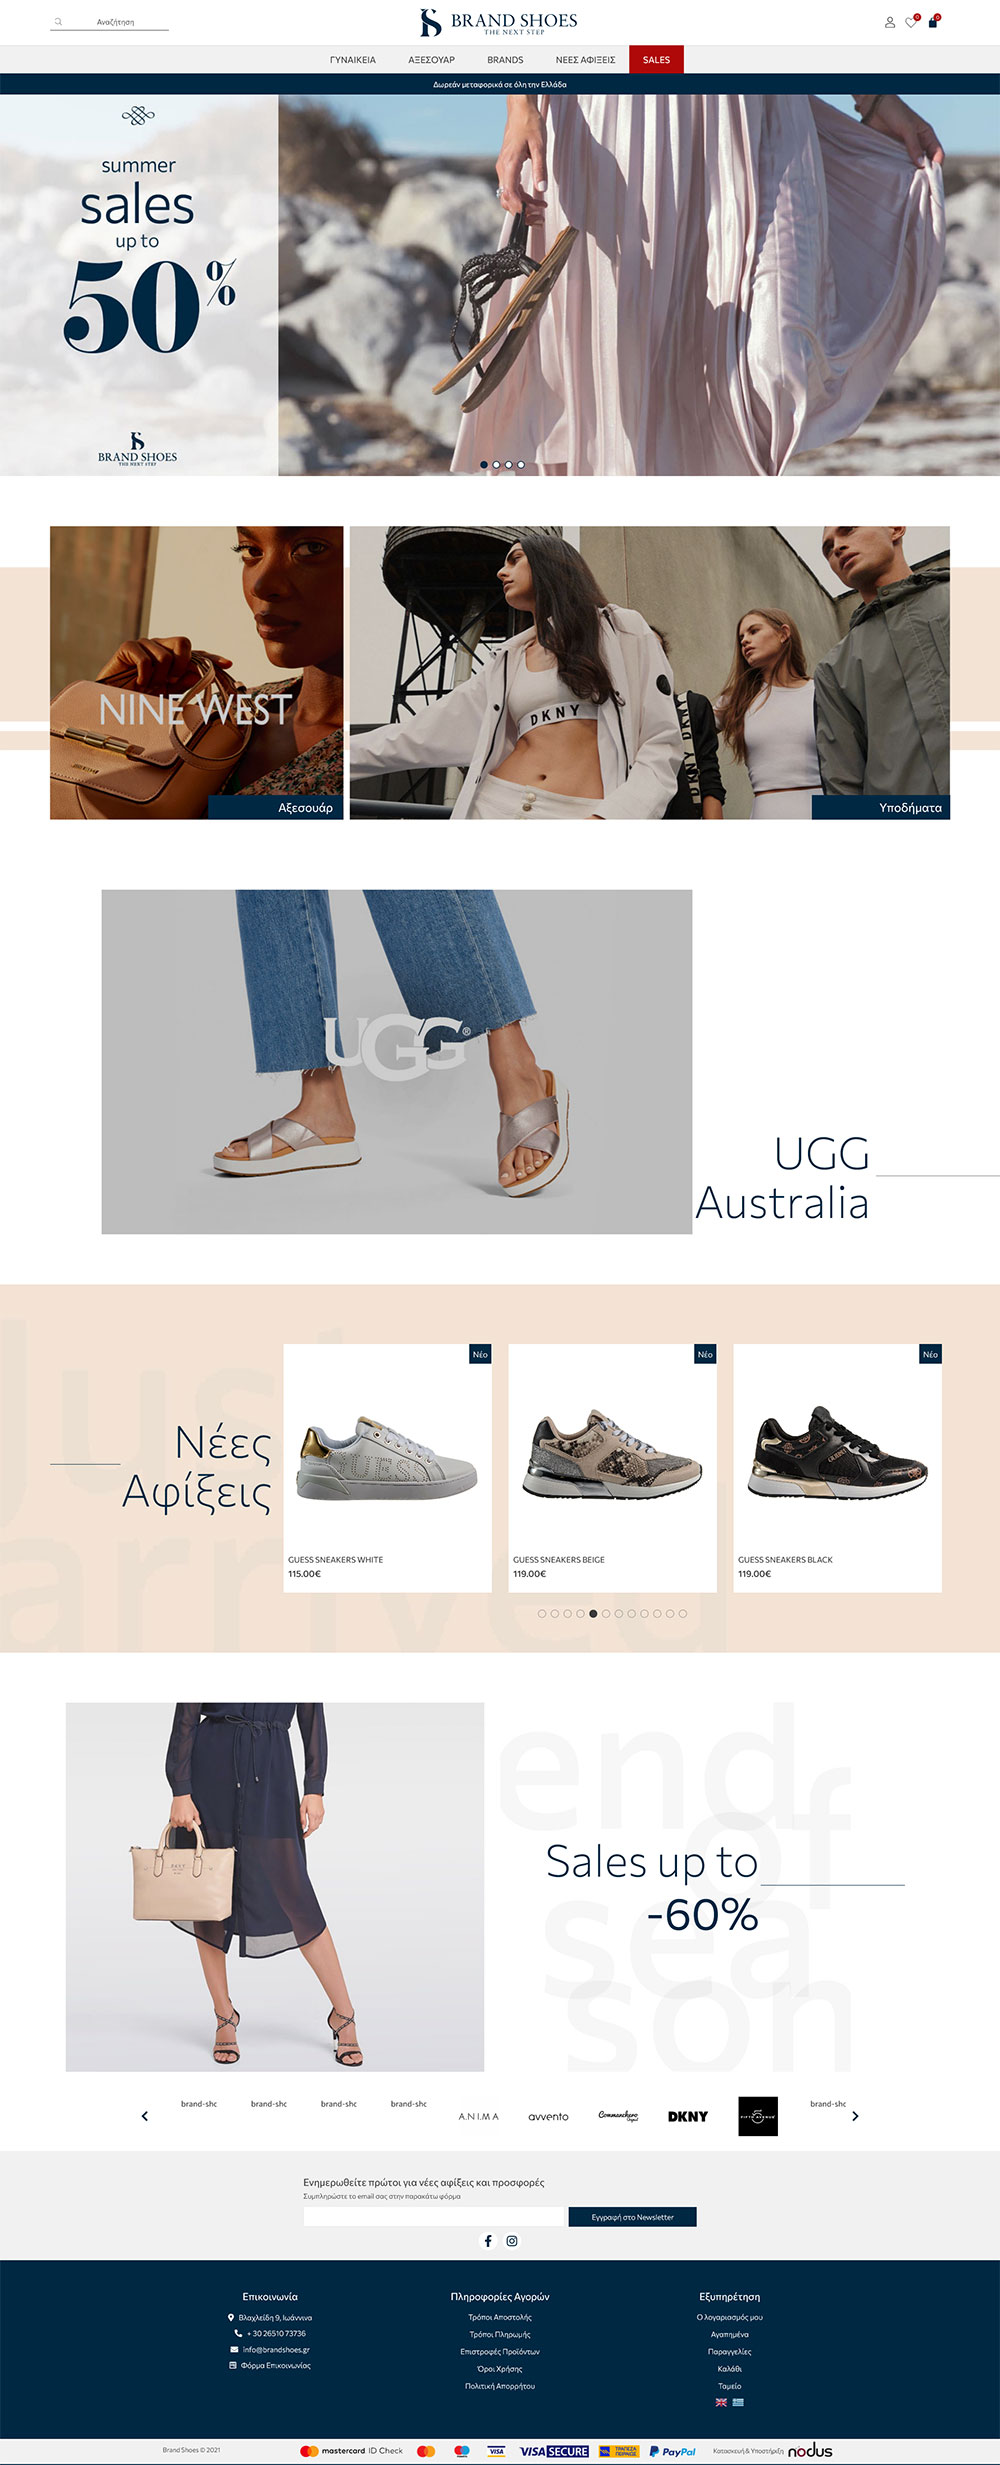 brandshoes-page-full